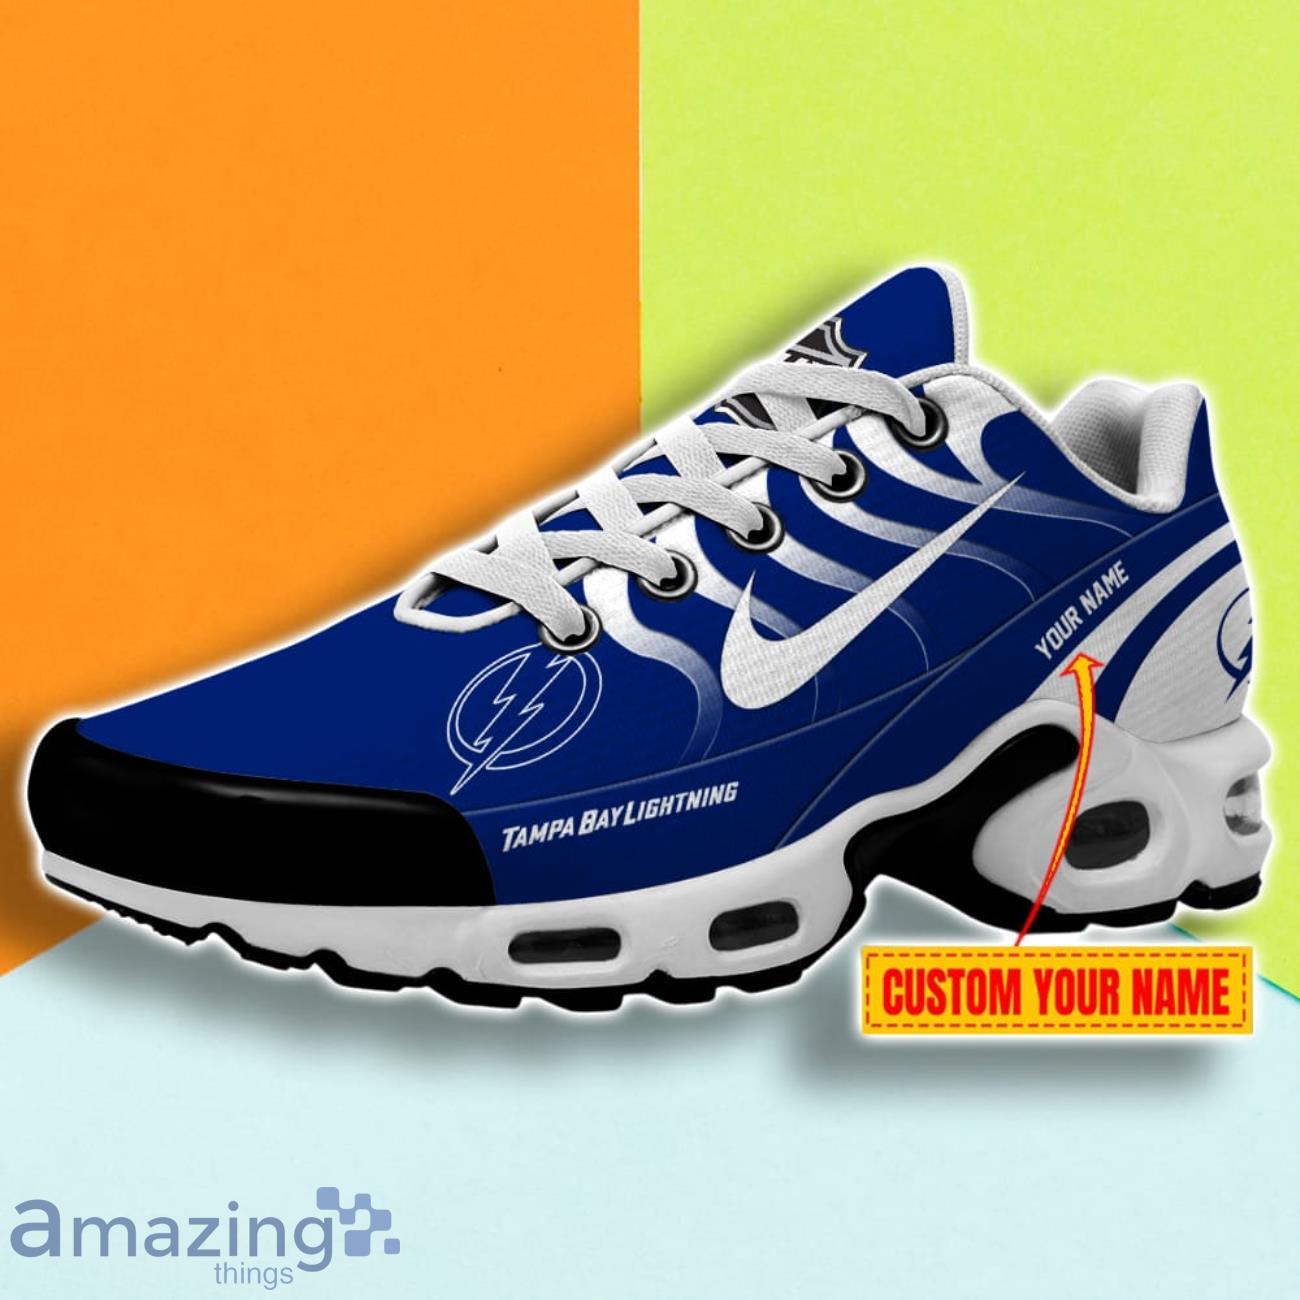 Tampa Bay Lightning NHL TN Sport Shoes Custom Name Enthusiastic Support From Fans Product Photo 1